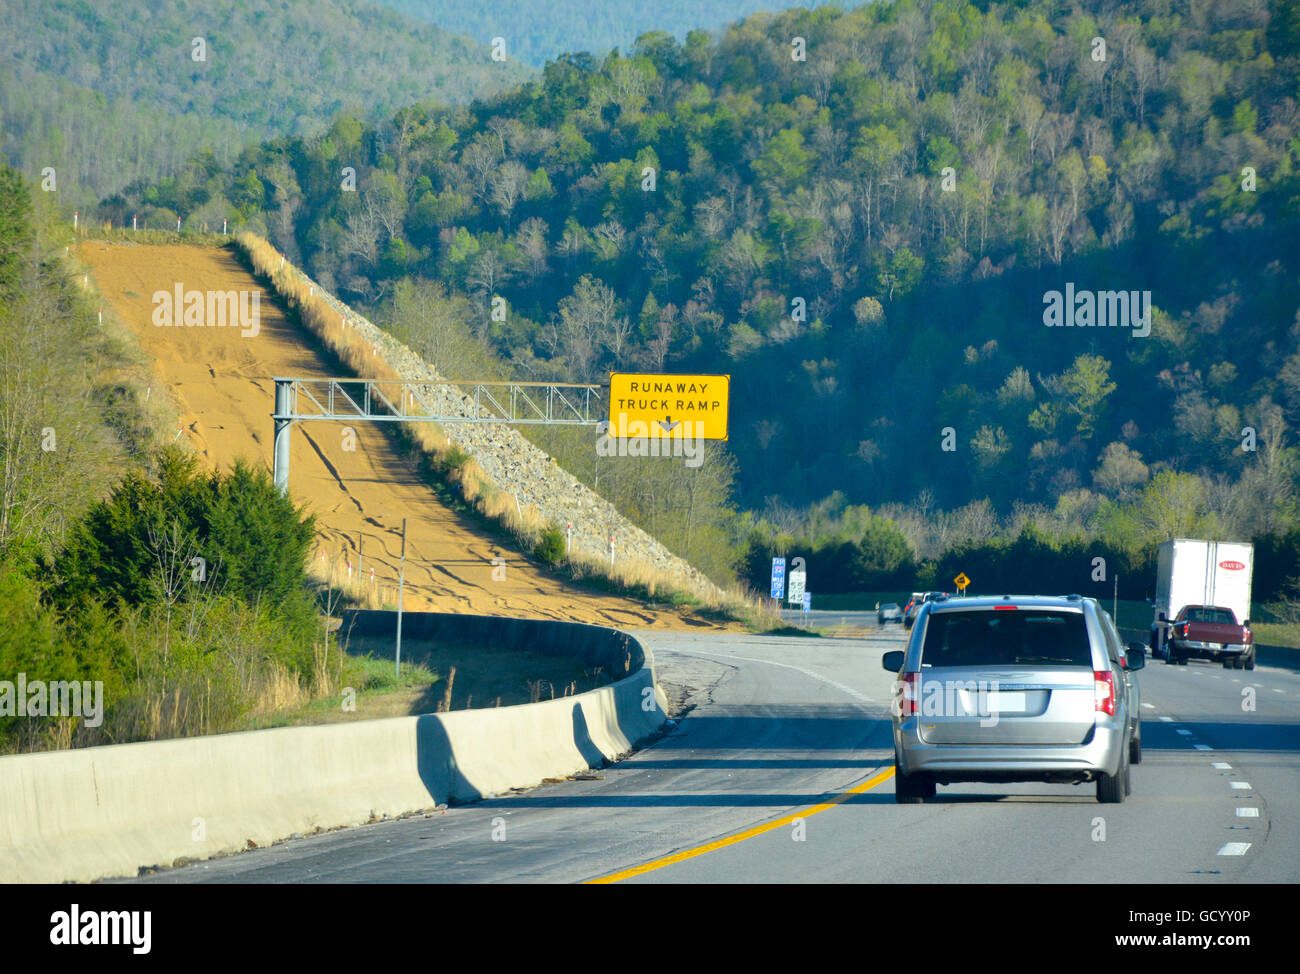 A runaway truck ramp for emergency escape by out of control truckers on interstate highway systems with steep downhill grades Stock Photo